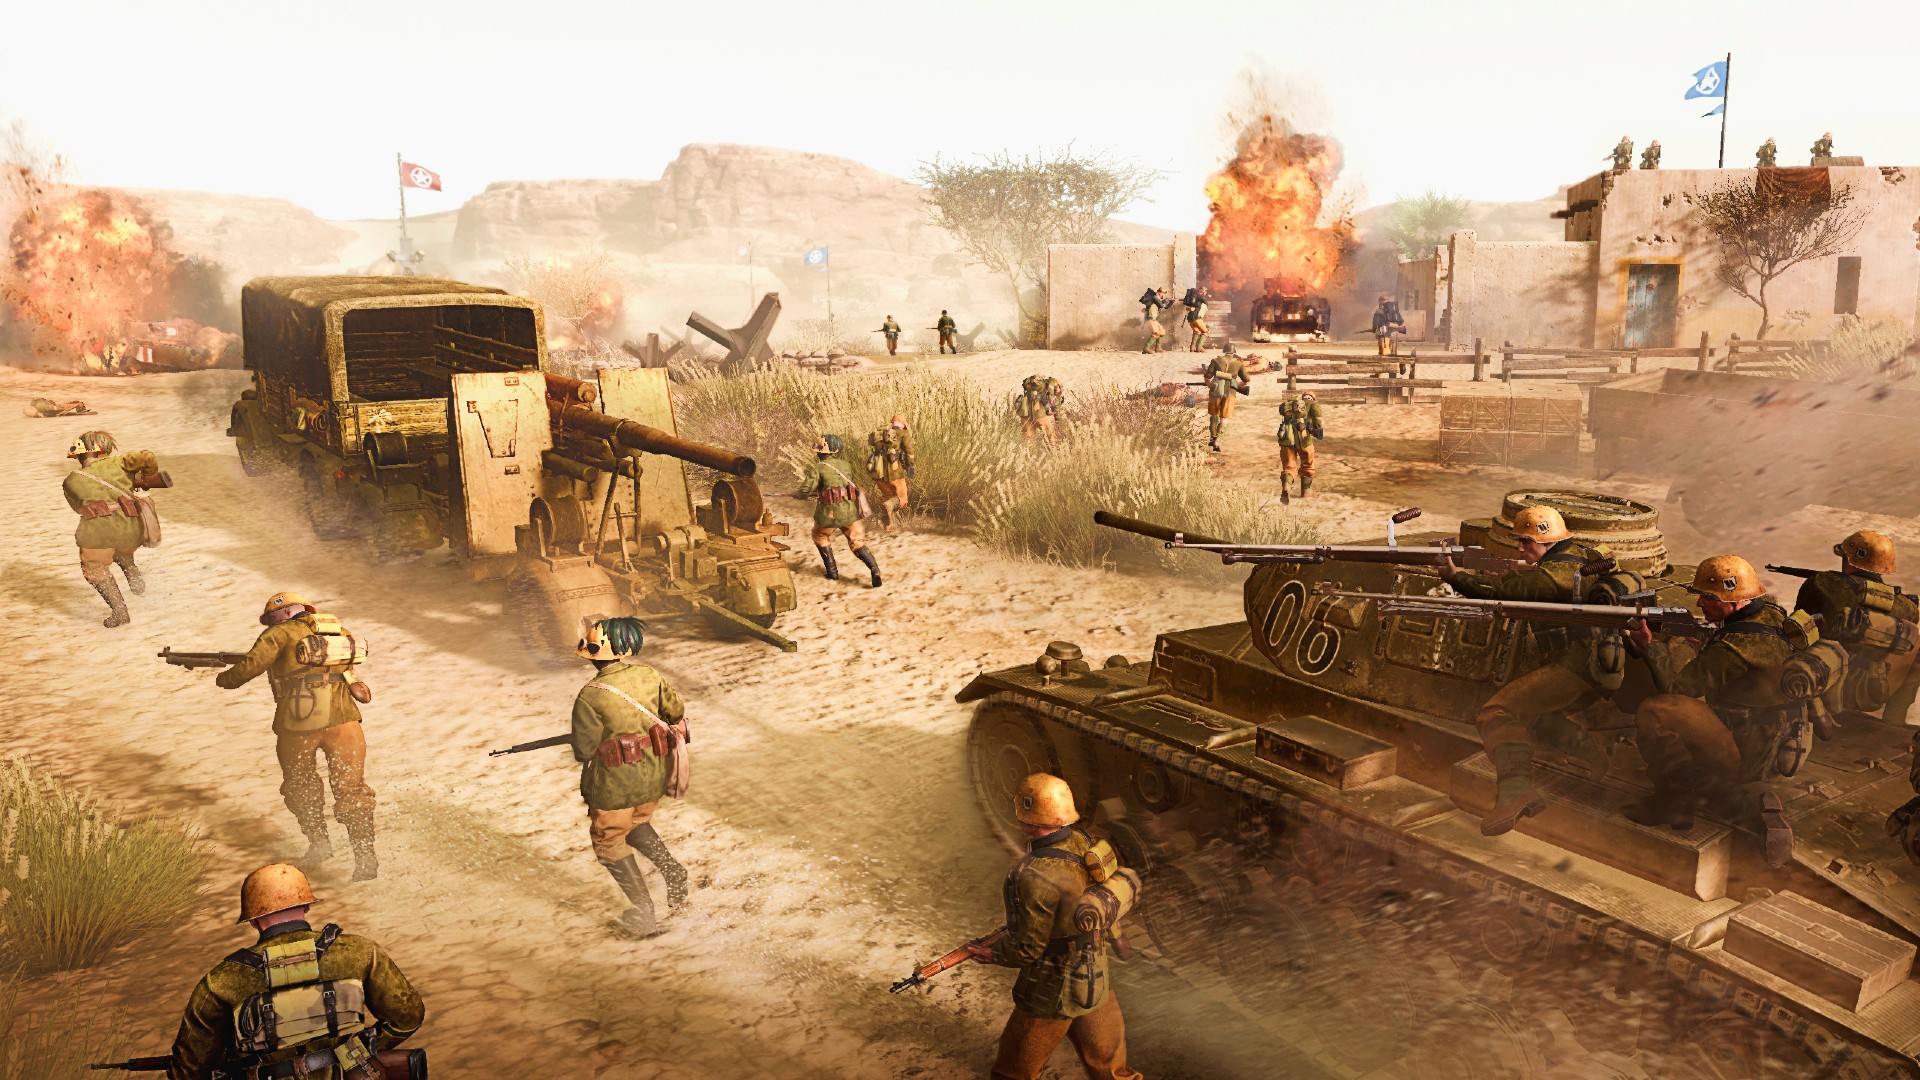 Company of Heroes 3 campaign takes 